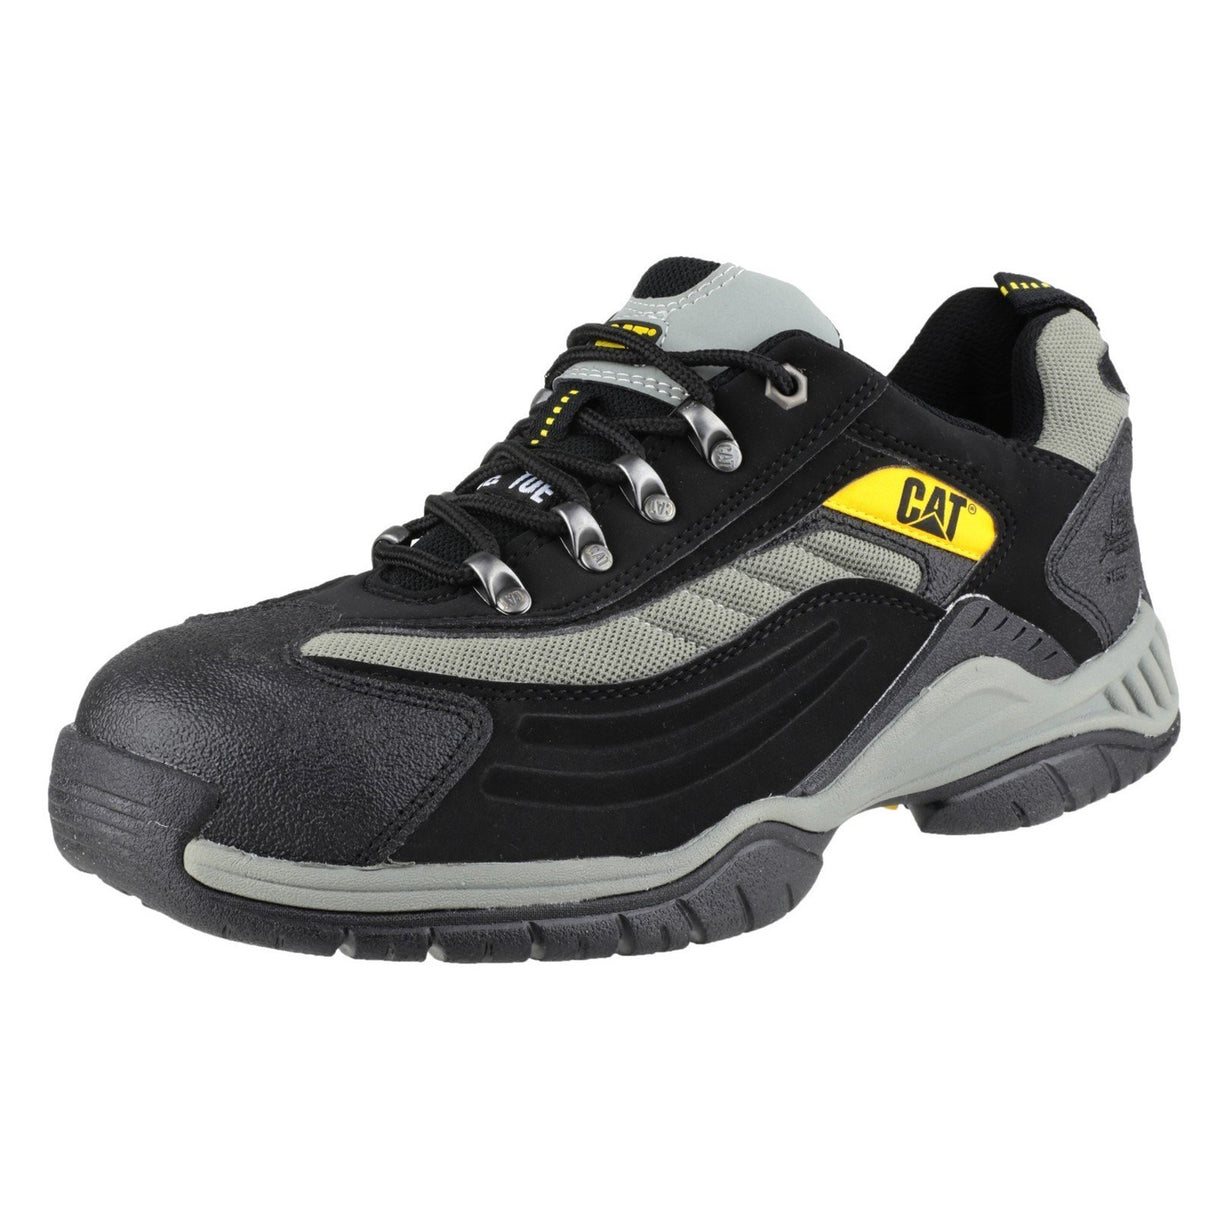 Caterpillar Moor Safety Shoes